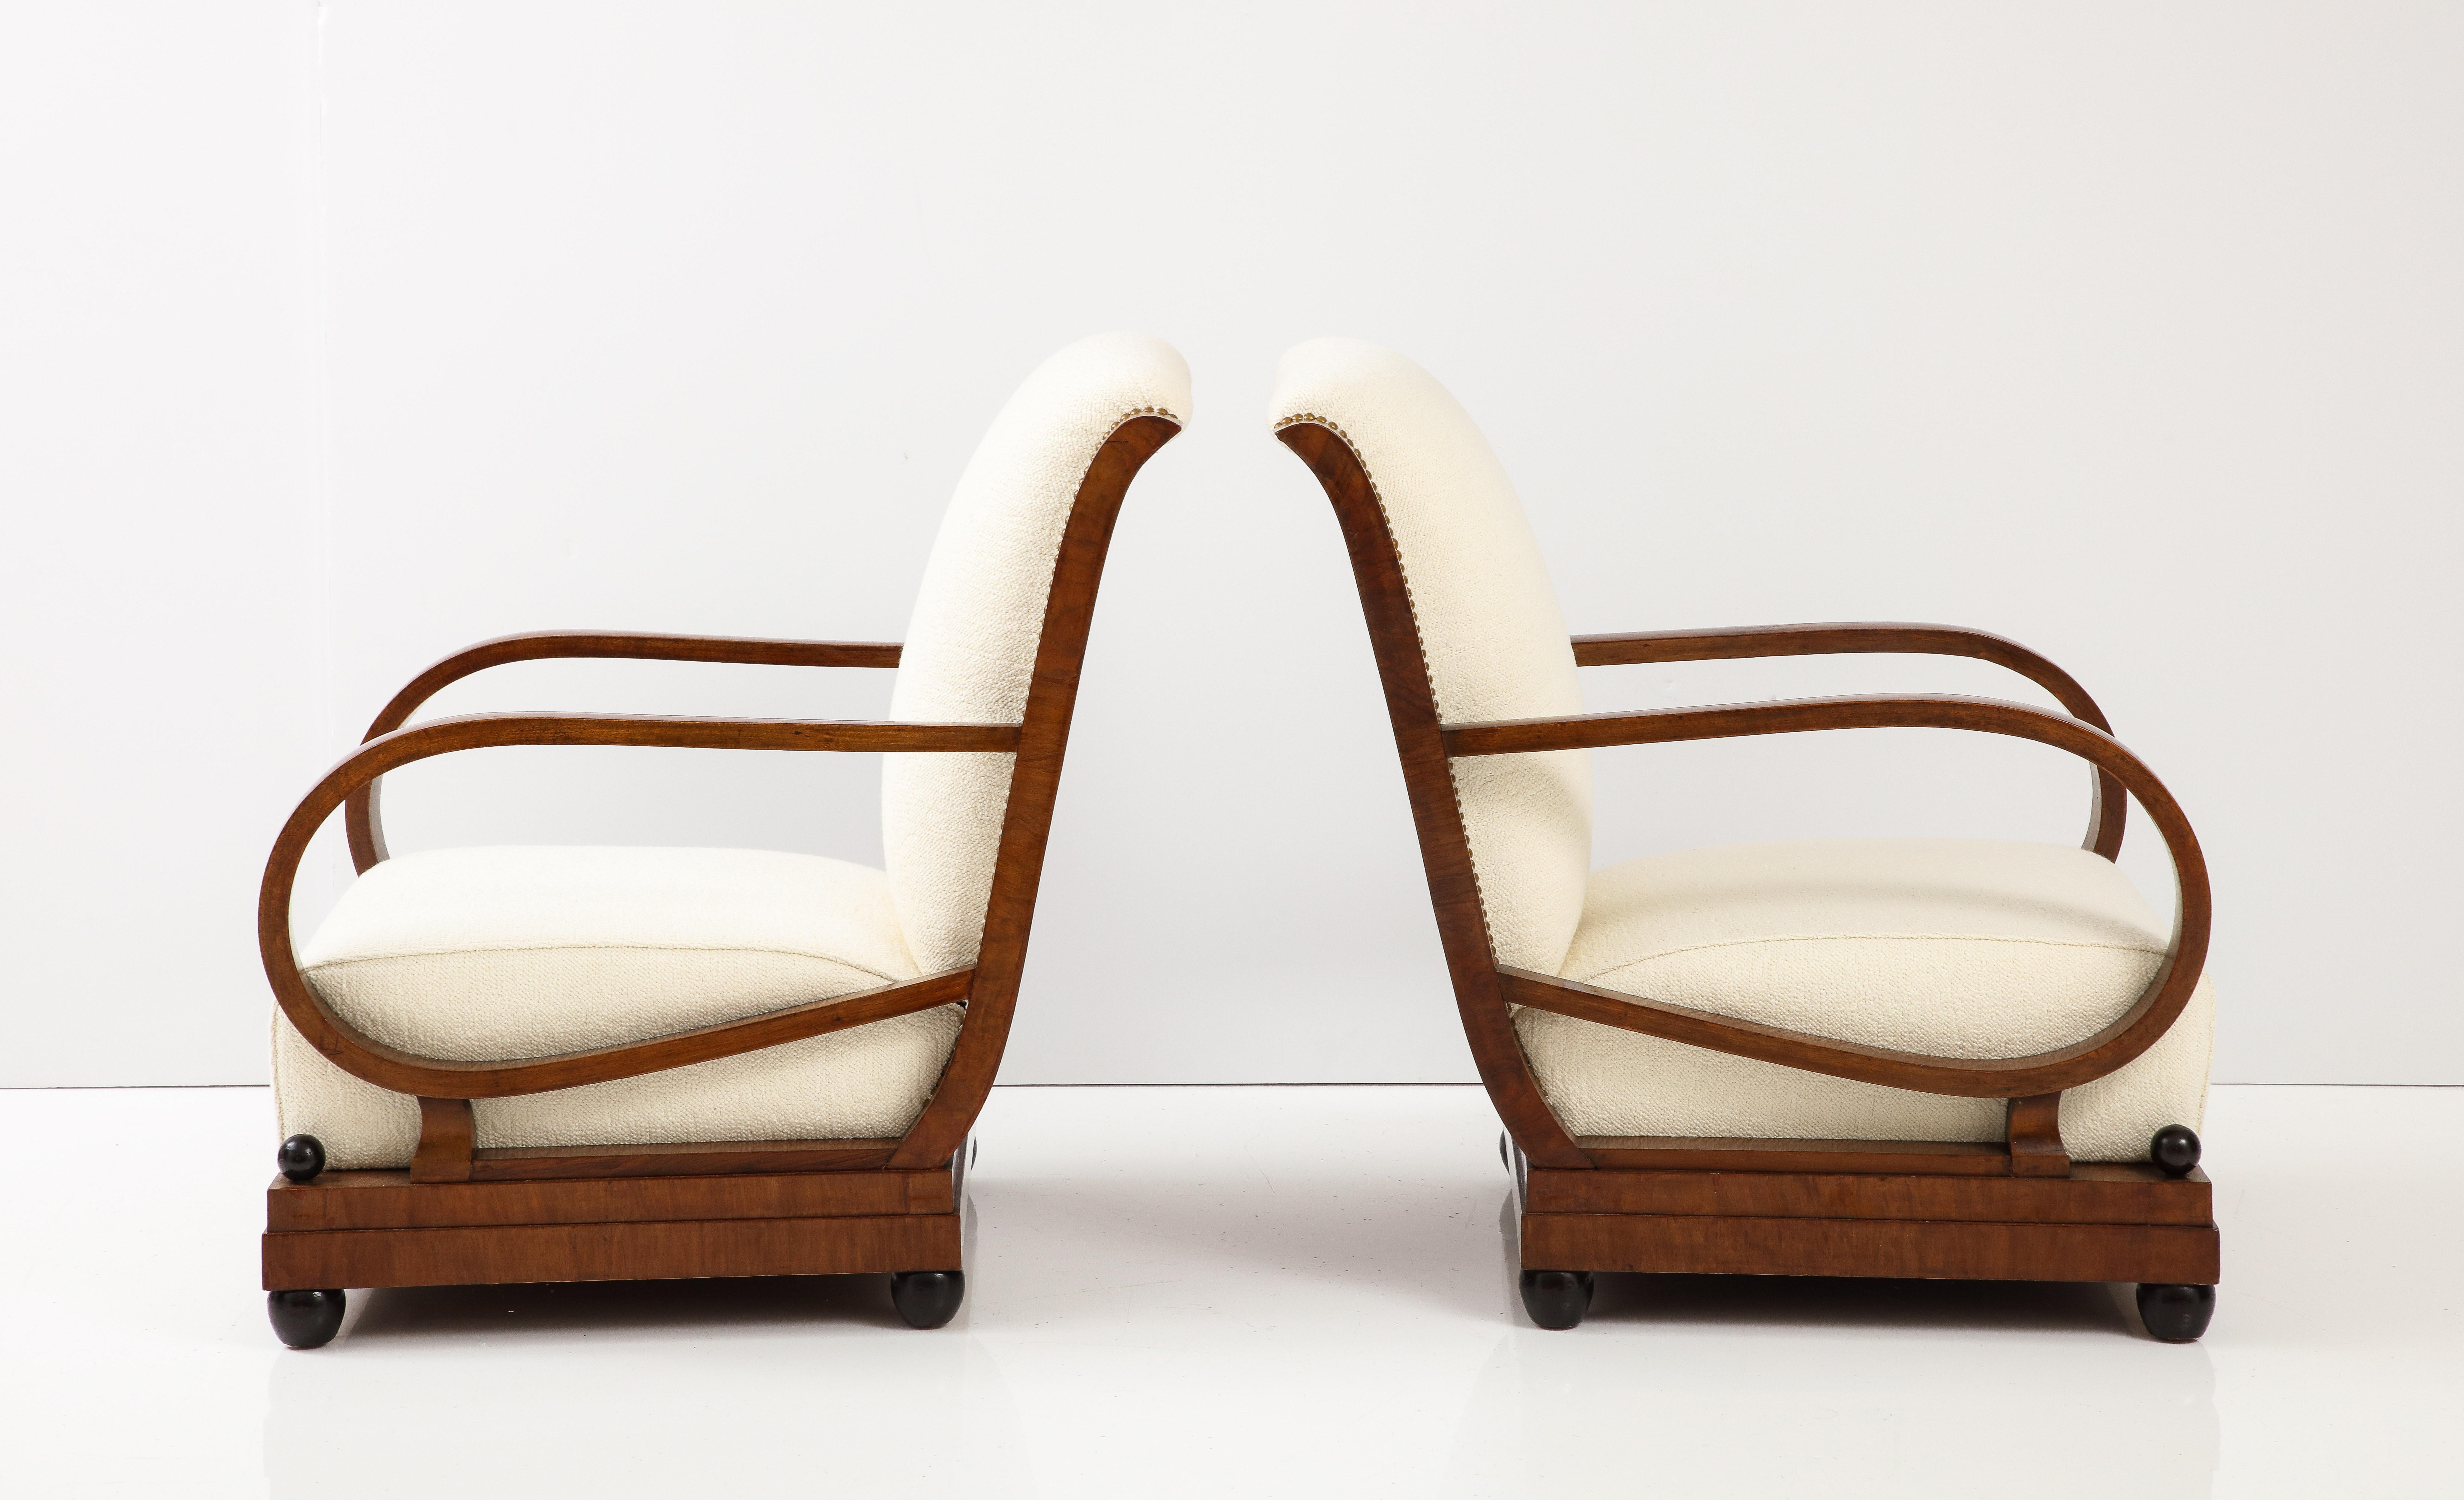 Art Deco Italian 1920's Walnut Armchairs / Lounge Chairs with Foot Stools